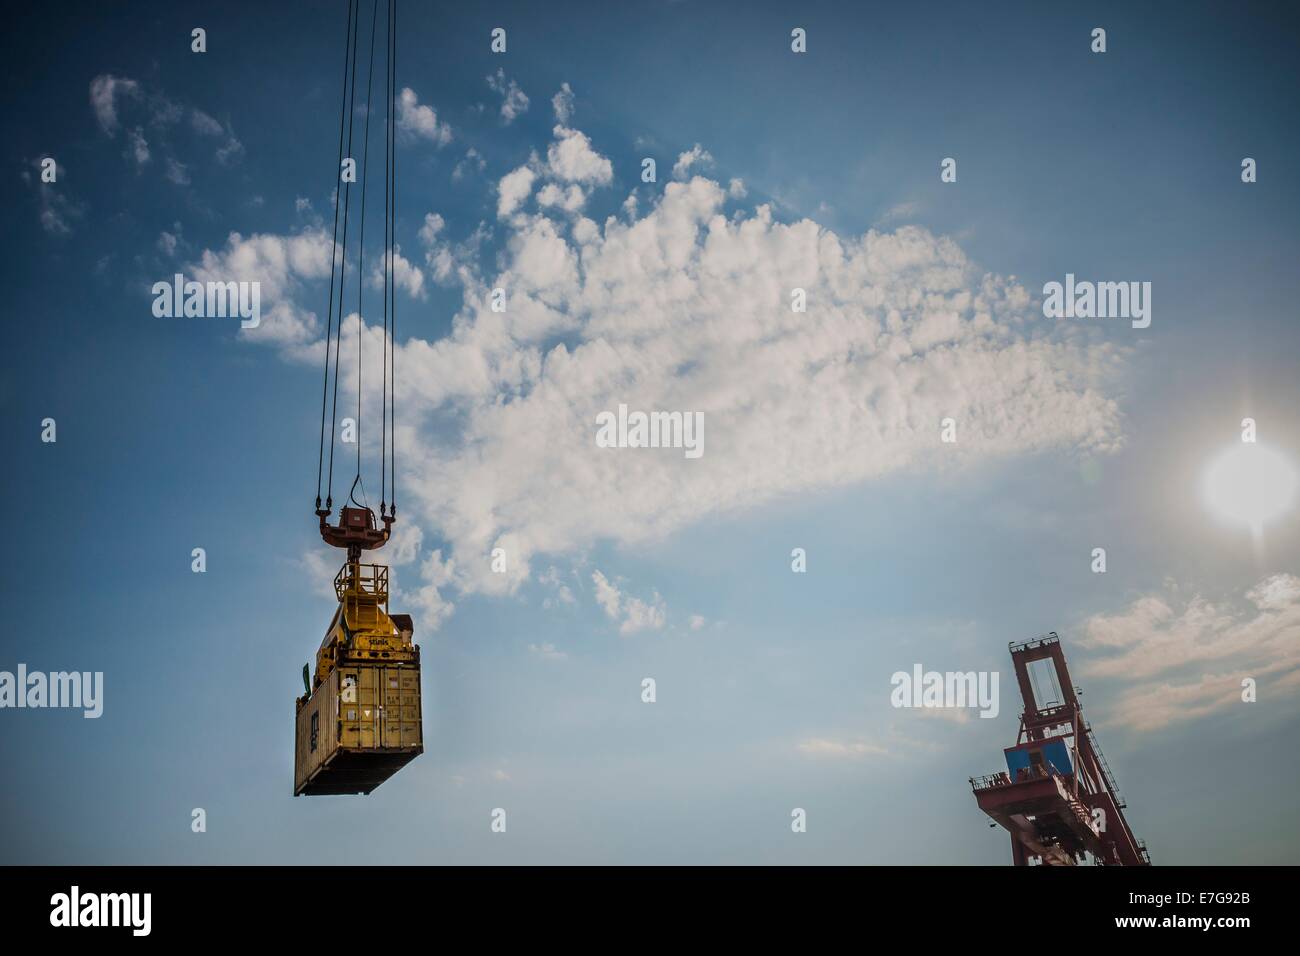 Containers have characterized and changed since the 50s of last century the trade in goods and the worldwide traffic. Pictures about container loading are icon images and an illustrations for news on industry, business and economy. 10 July 2014 Stock Photo